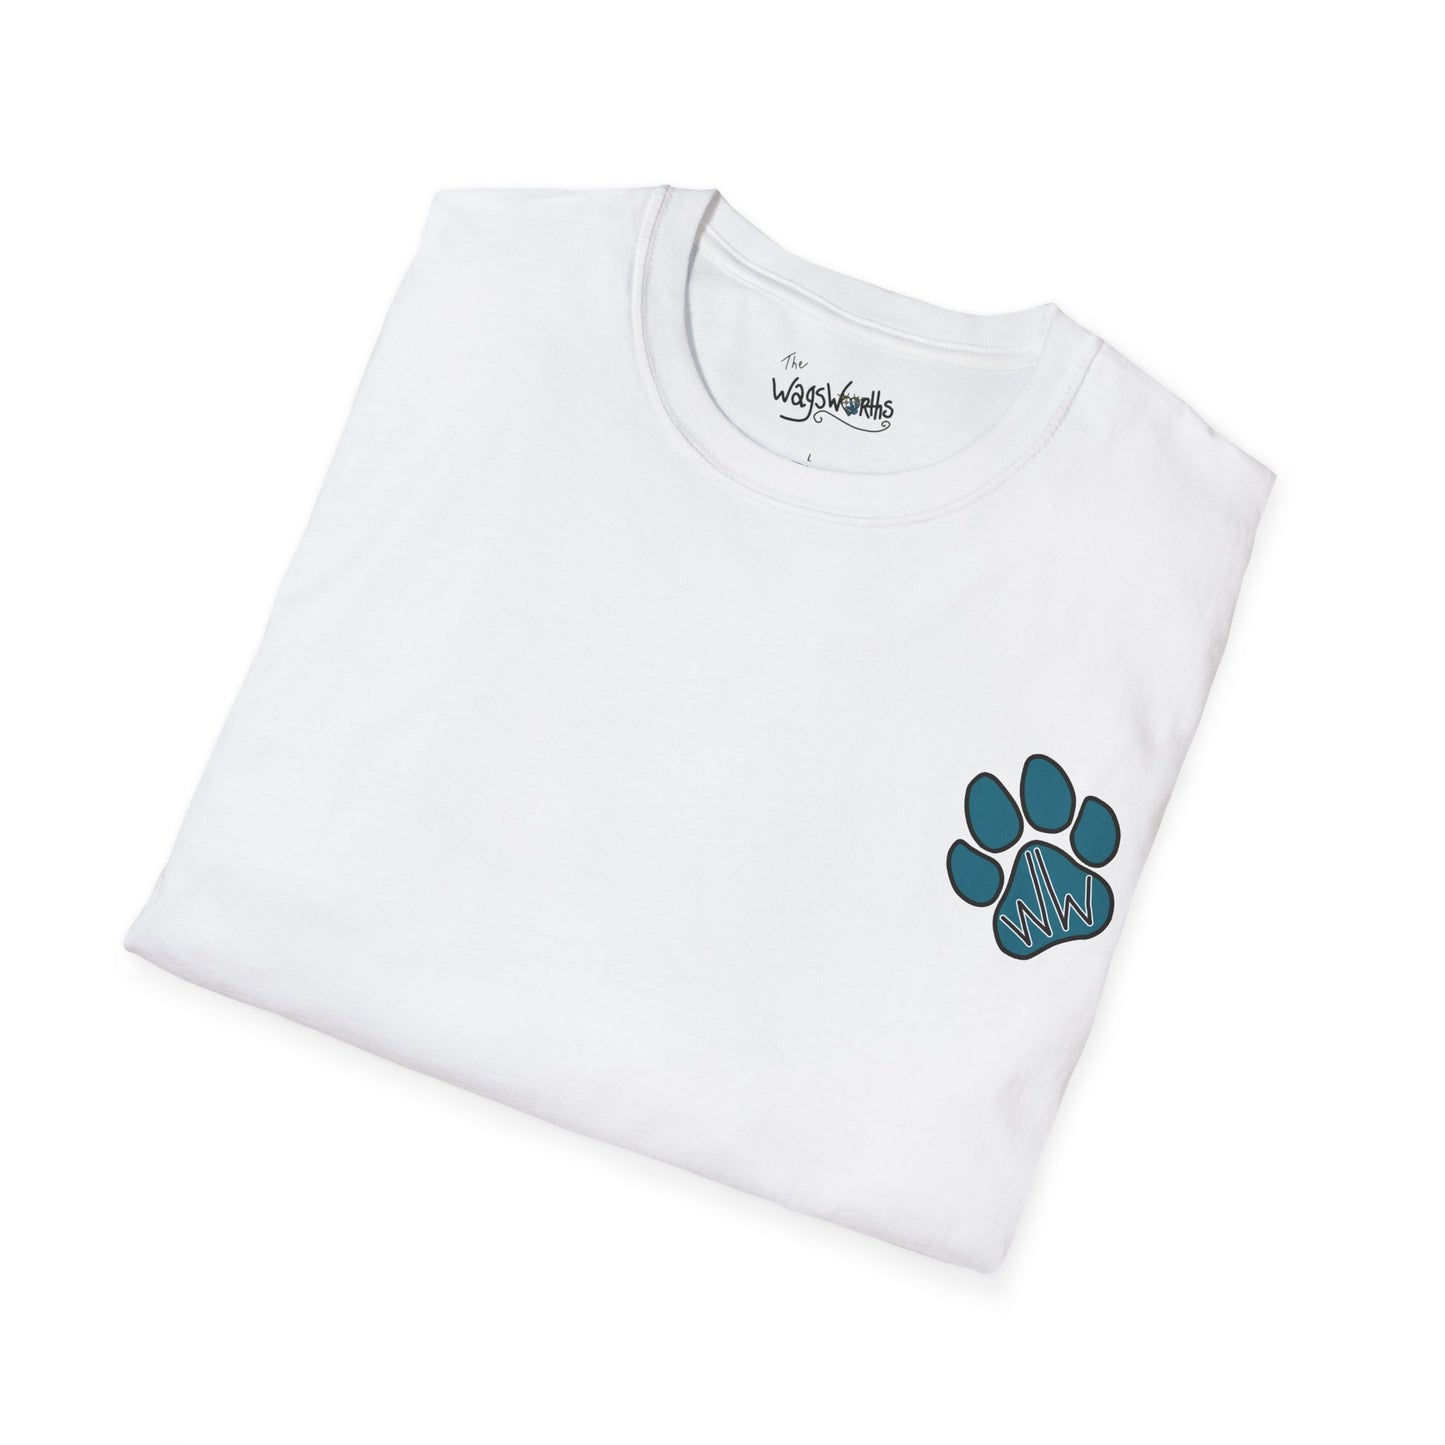 Re-Classic Dog Graphic Tee